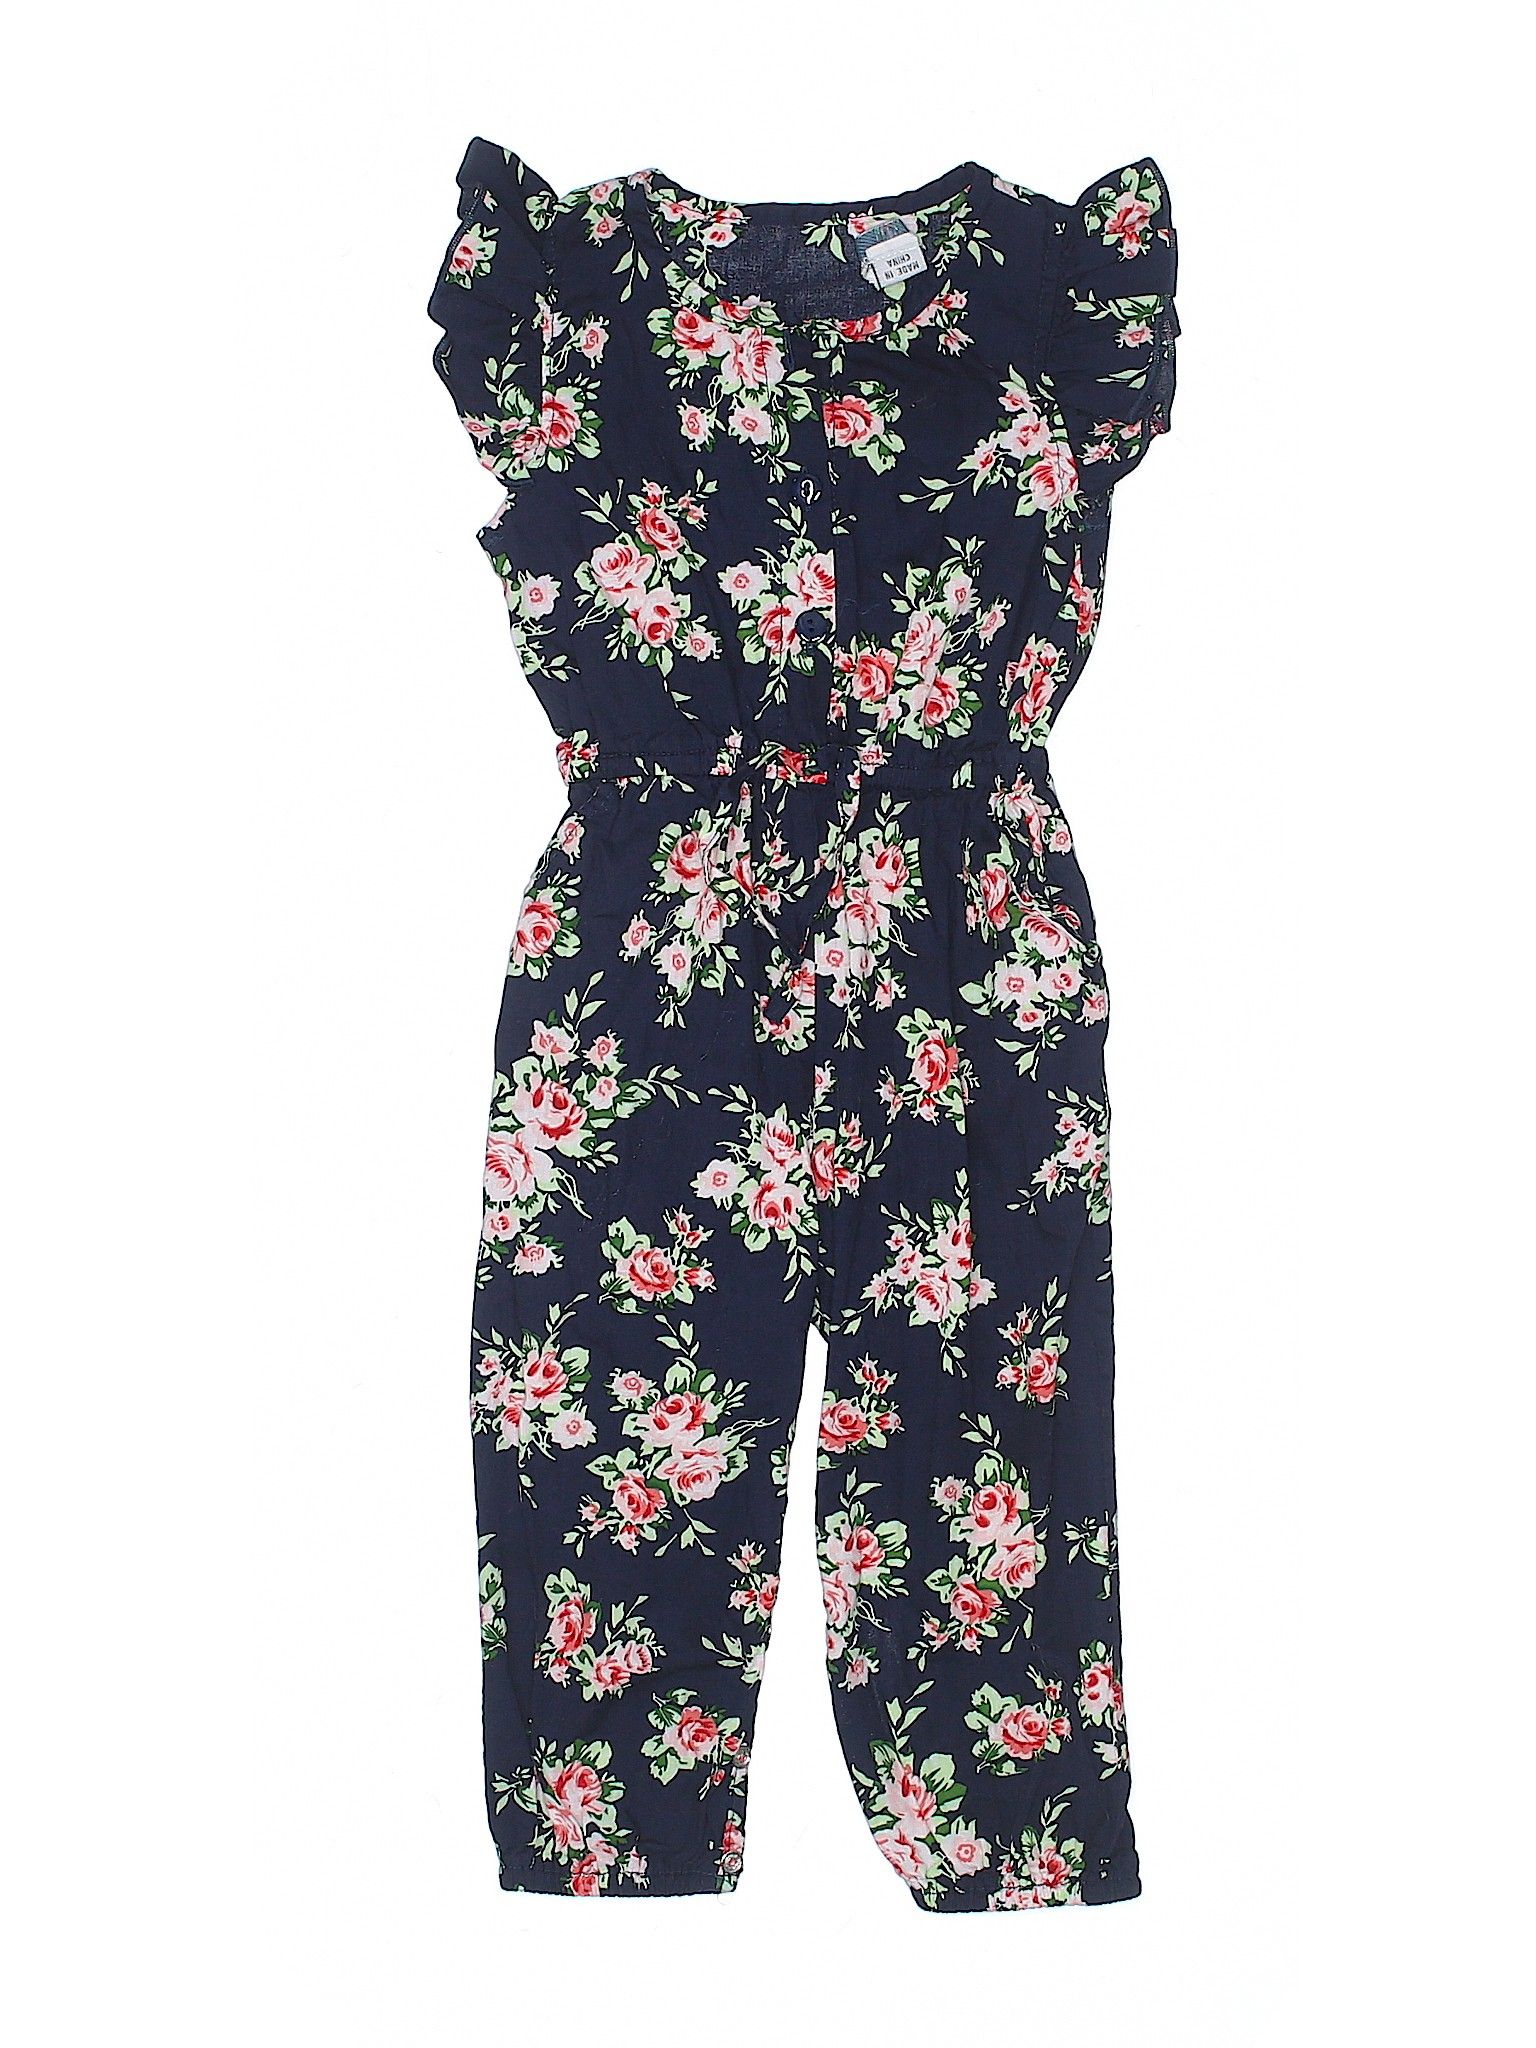 BAILEY'S BLOSSOMS Jumpsuit Size 3T: Navy Blue Girls Skirts & Dresses - 44778083 | thredUP